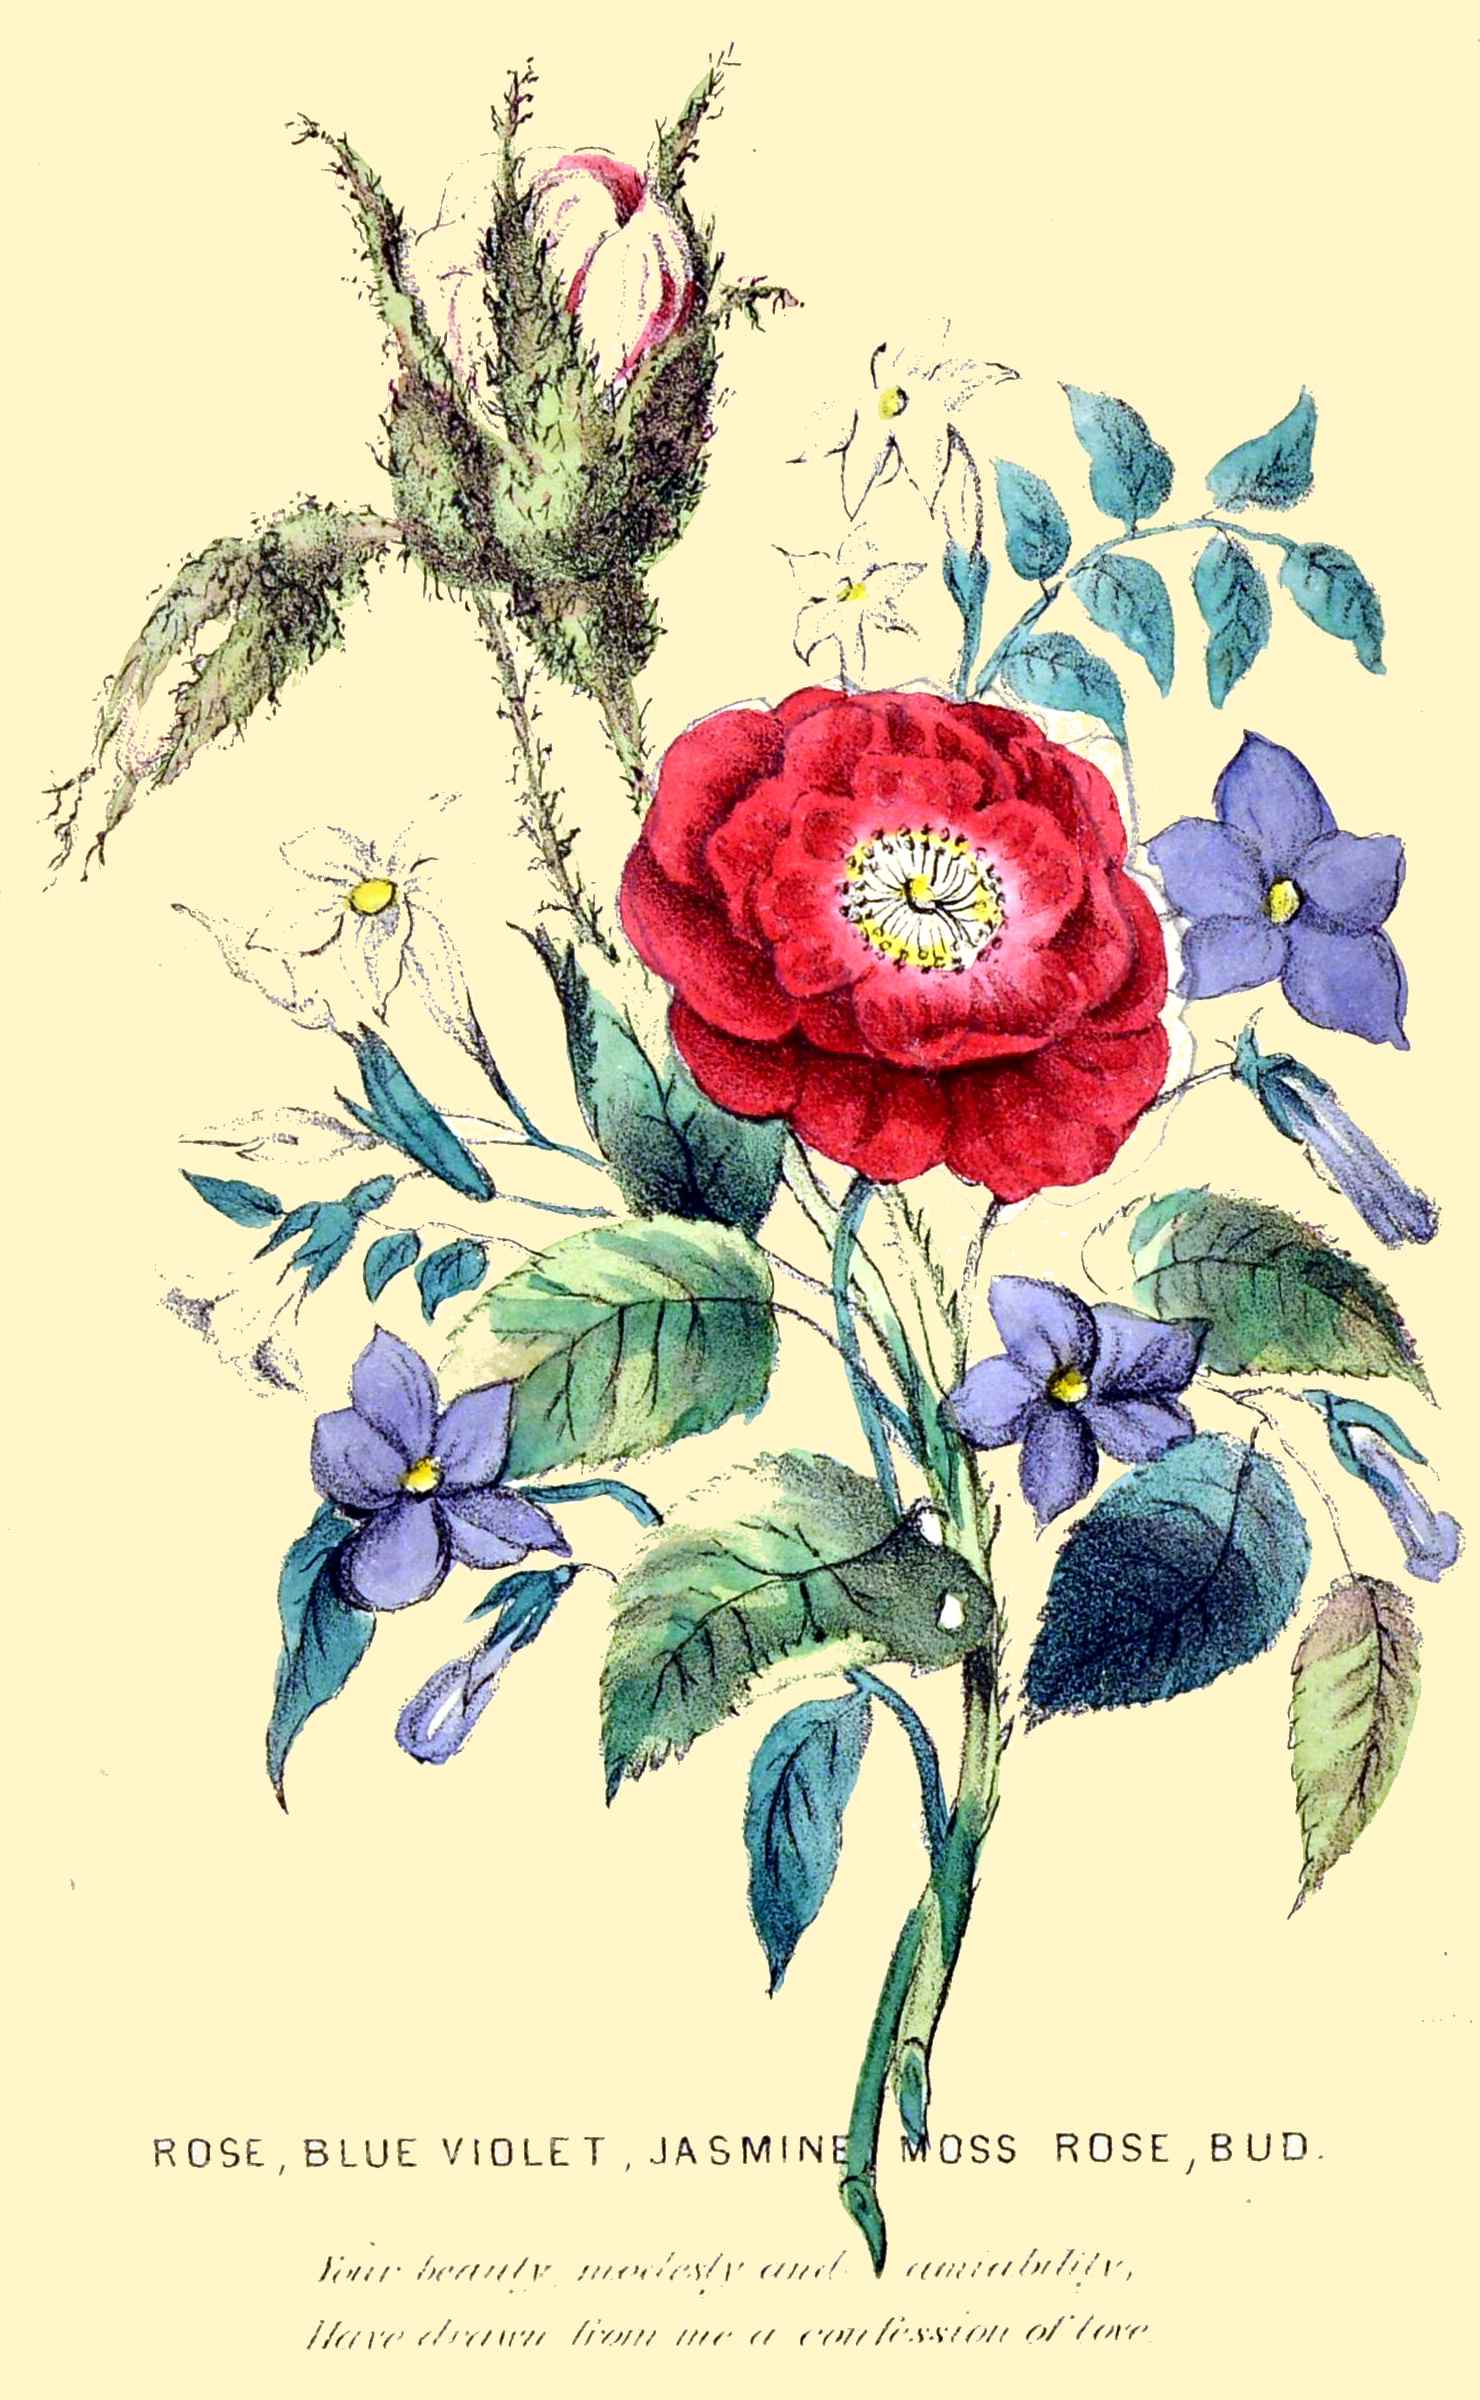 The Project Gutenberg eBook of The language of flowers, by Henrietta Dumont.